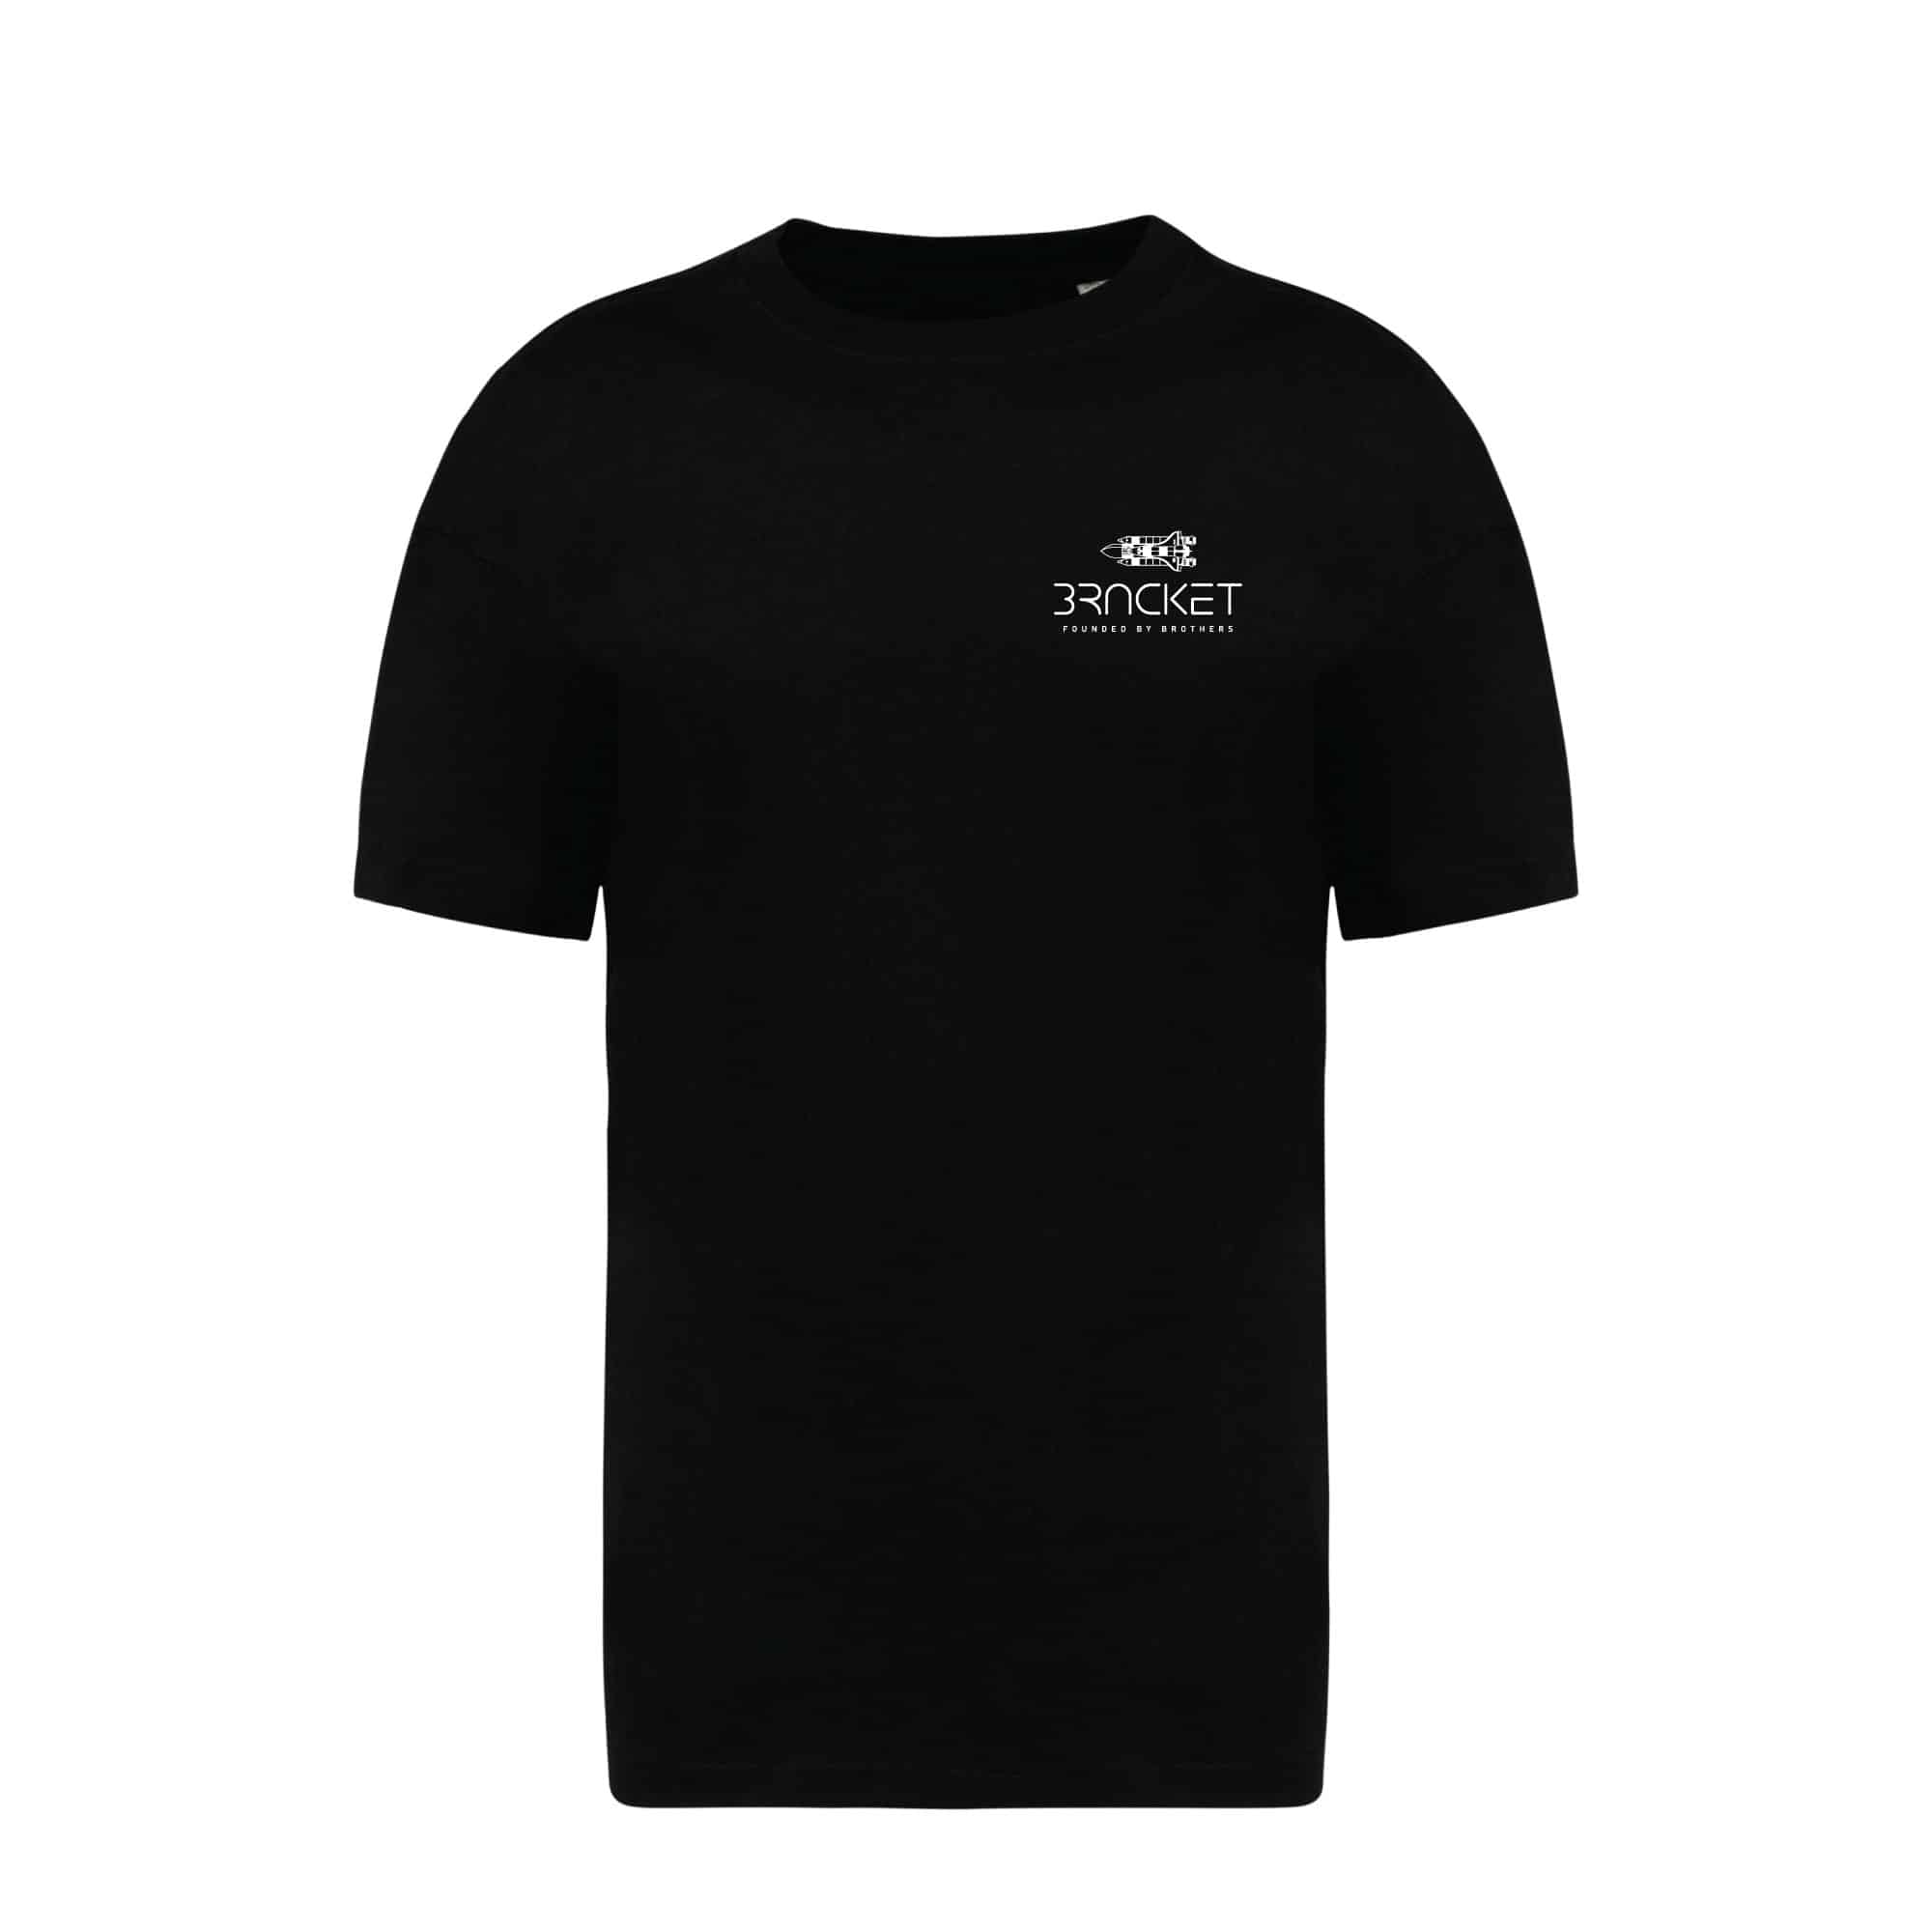 Black-shirt-SPACE-front